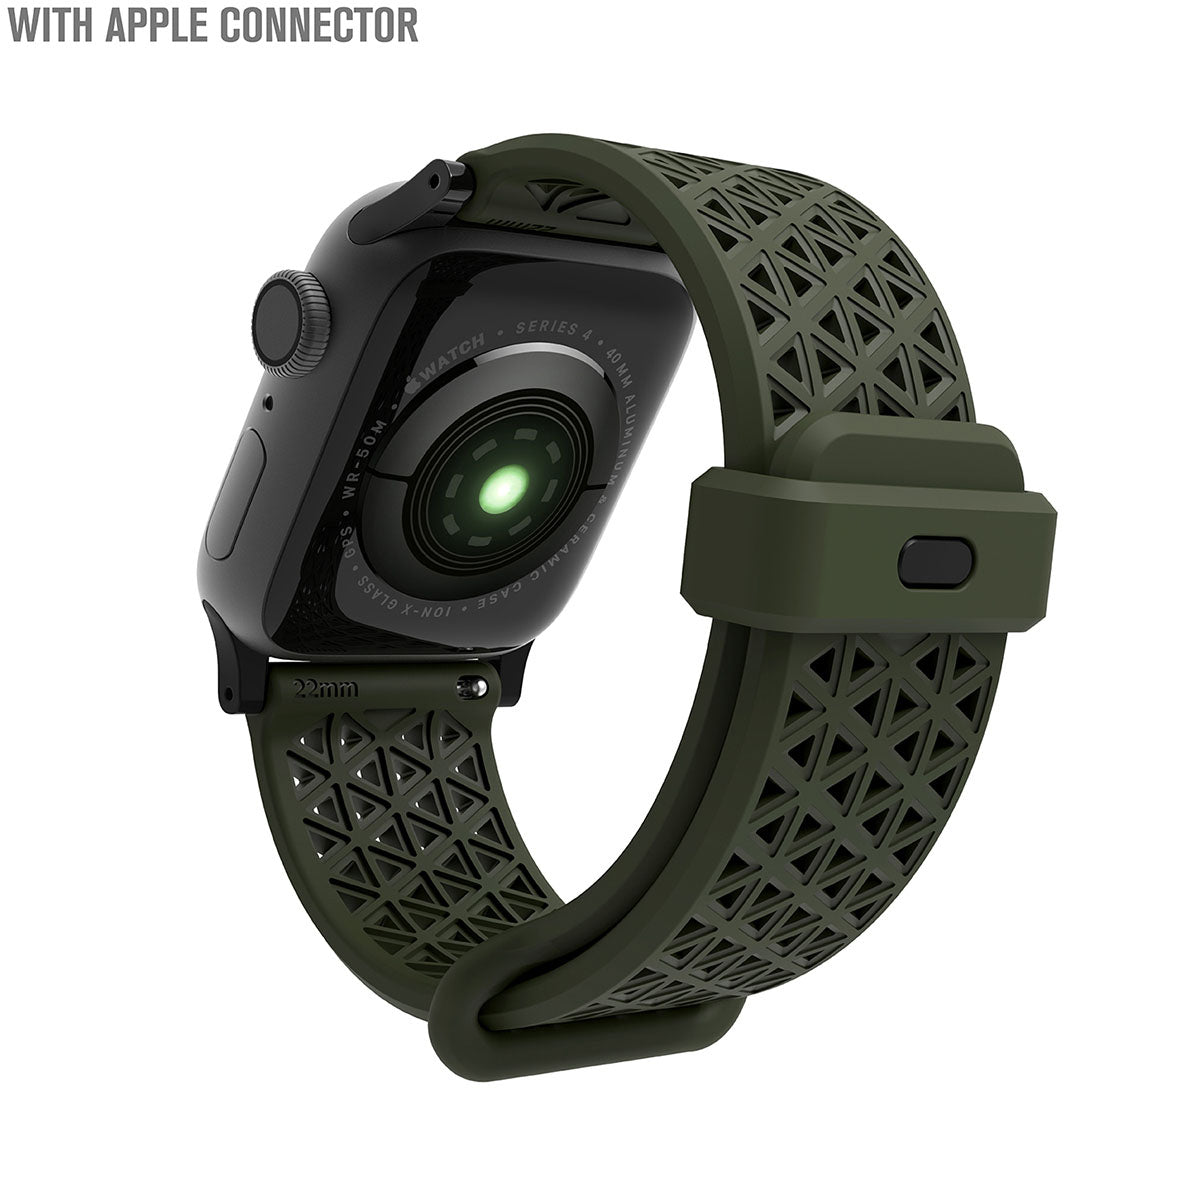 catalyst apple watch series 9 8 7 6 5 4 se gen 2 1 38 40 41mm sports band with apple connector apple watch back view with sports band army green text reads with apple connector